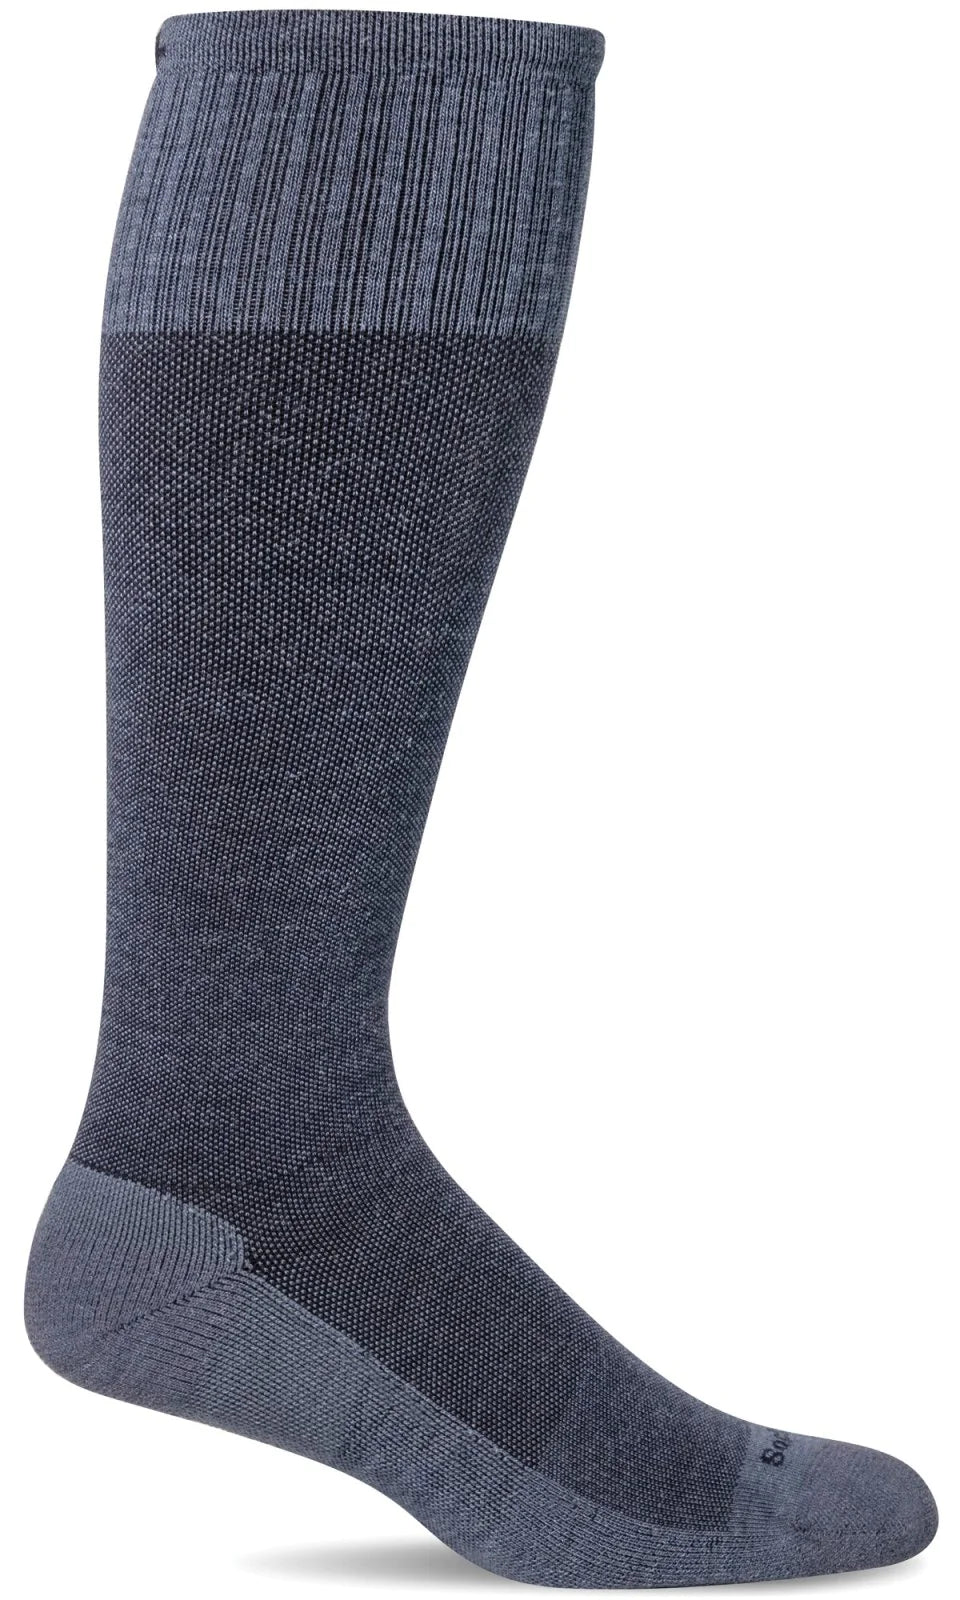 Men's The Basic | Moderate Graduated Compression Socks